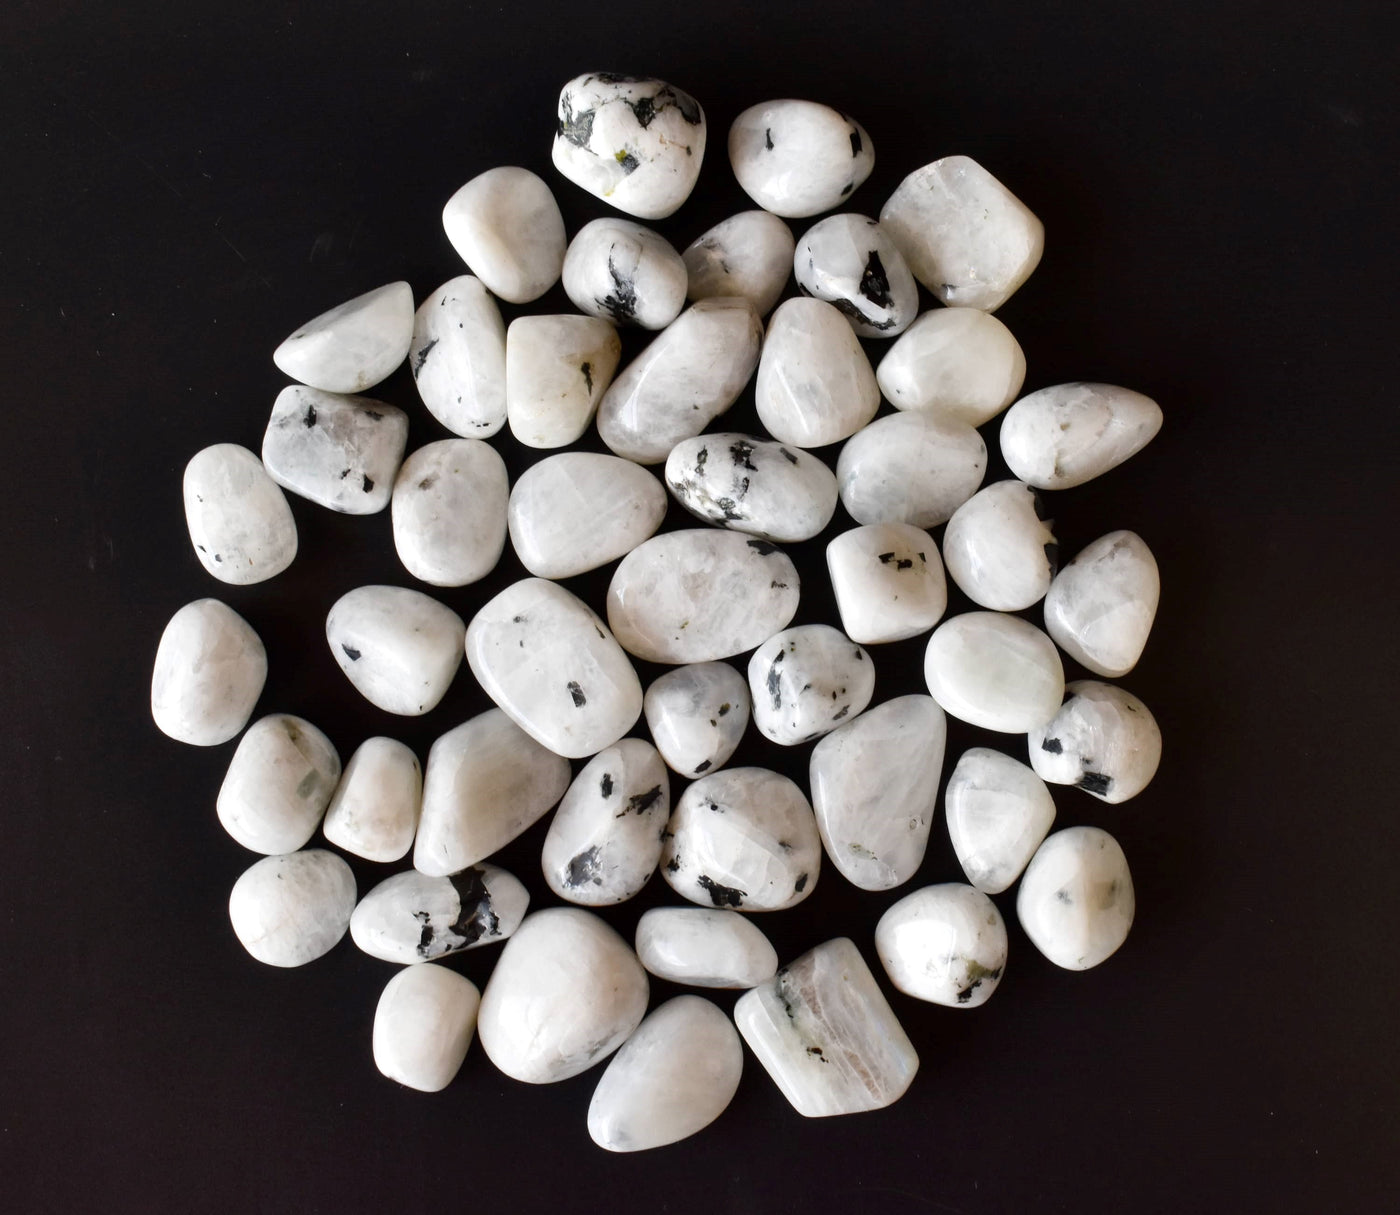 Rainbow Moonstone Tumbled Crystals For Psychic Abilities and Angelic Communication